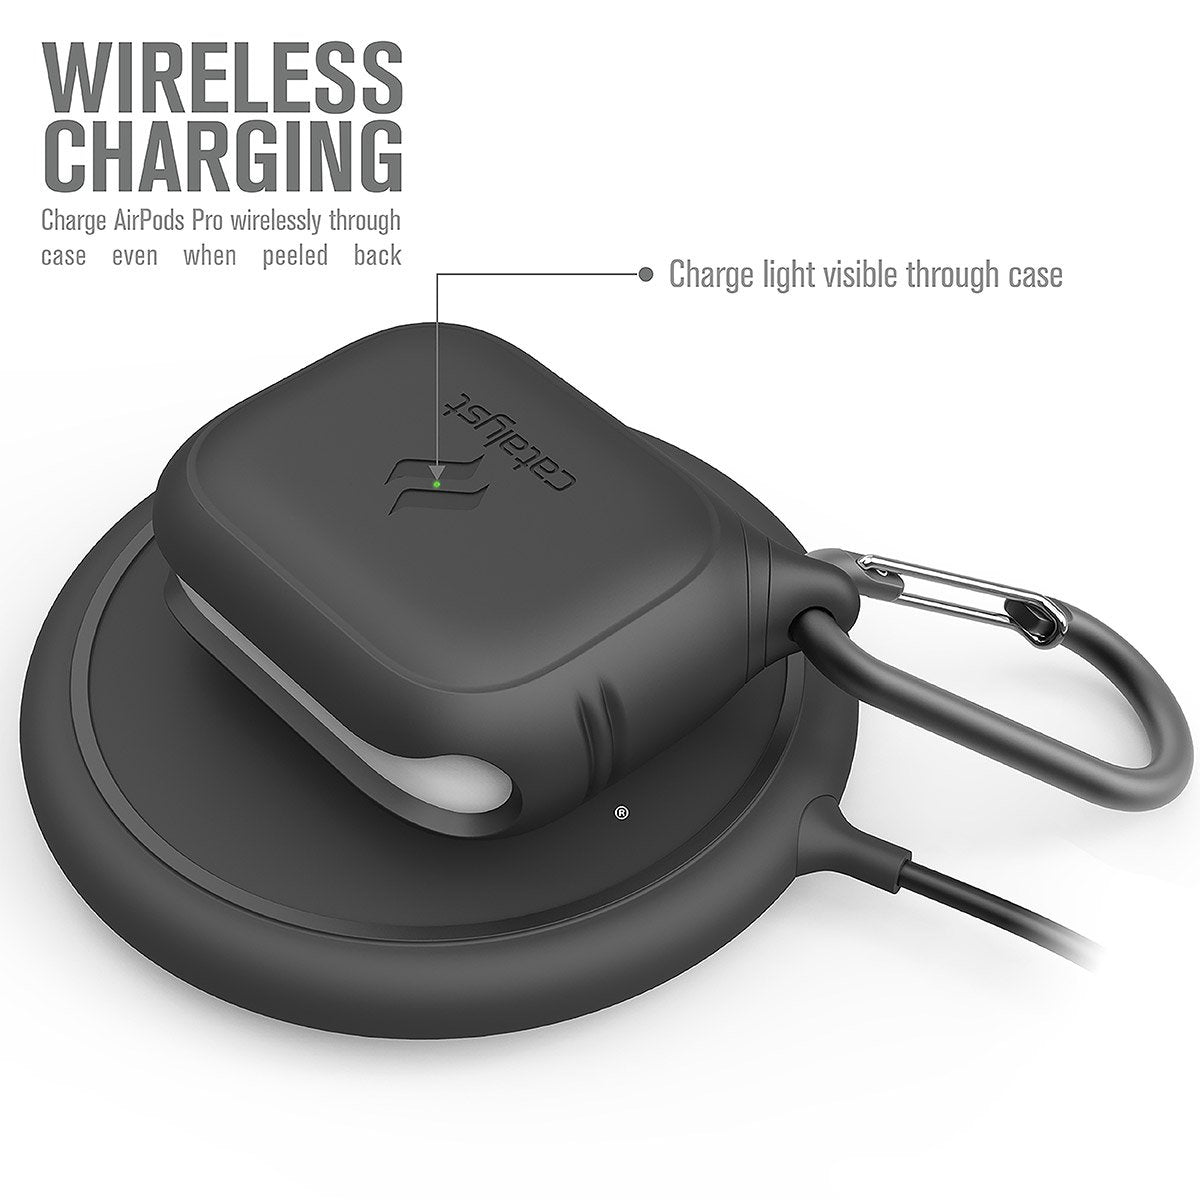 CATAPDPROBLK | catalyst airpods pro gen 2 1 waterproof case carabiner stealth-black on top of a wireless charger text reads wireless charging charge airpods pro wirelessly through case even when peeled back charge light visible through case